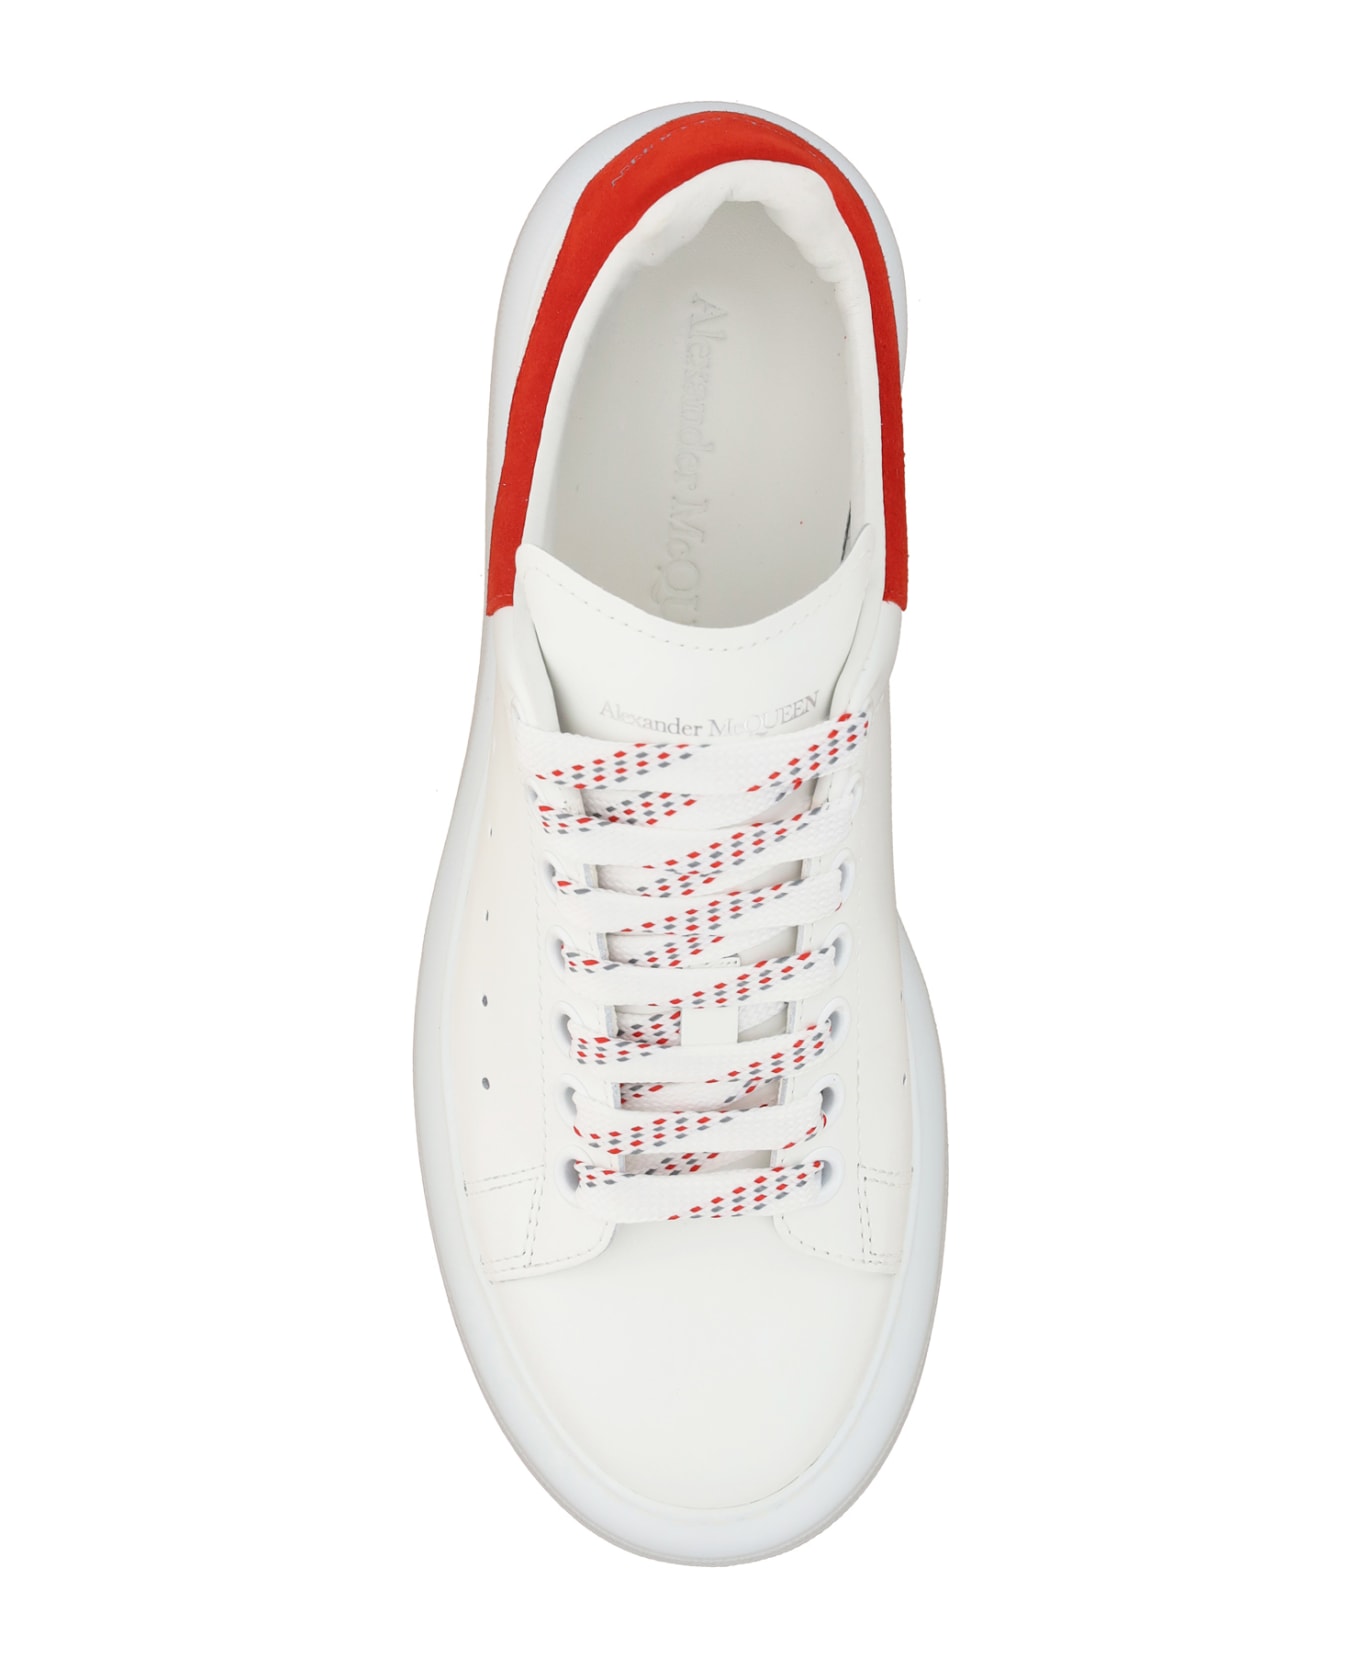 Alexander McQueen Oversized Sneakers In Leather With Contrasting Heel Tab - White Lust Red スニーカー